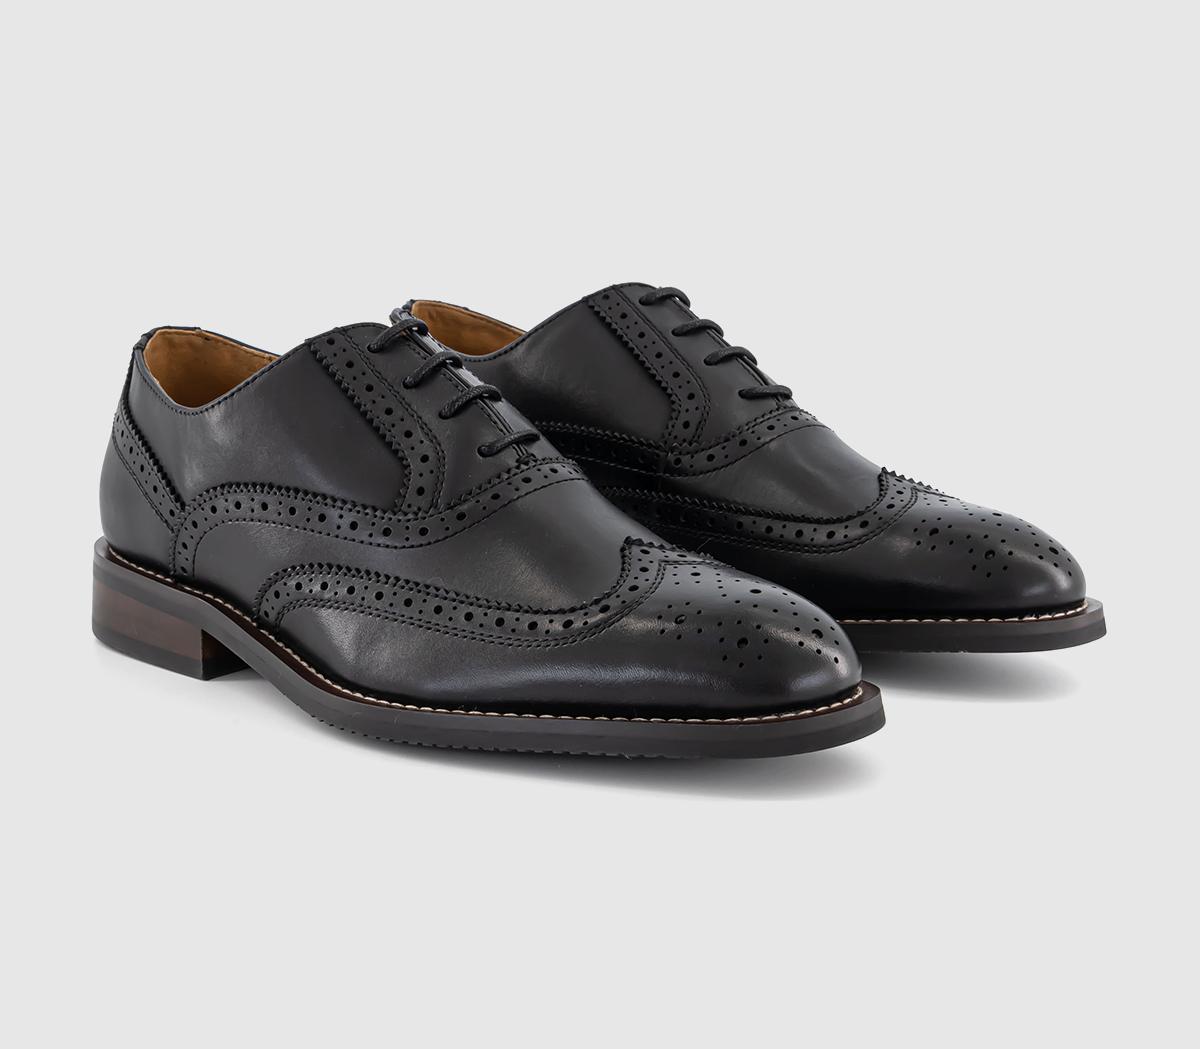 OFFICE Mens Mariner Wingcap Brogue Shoes Black Leather, 10